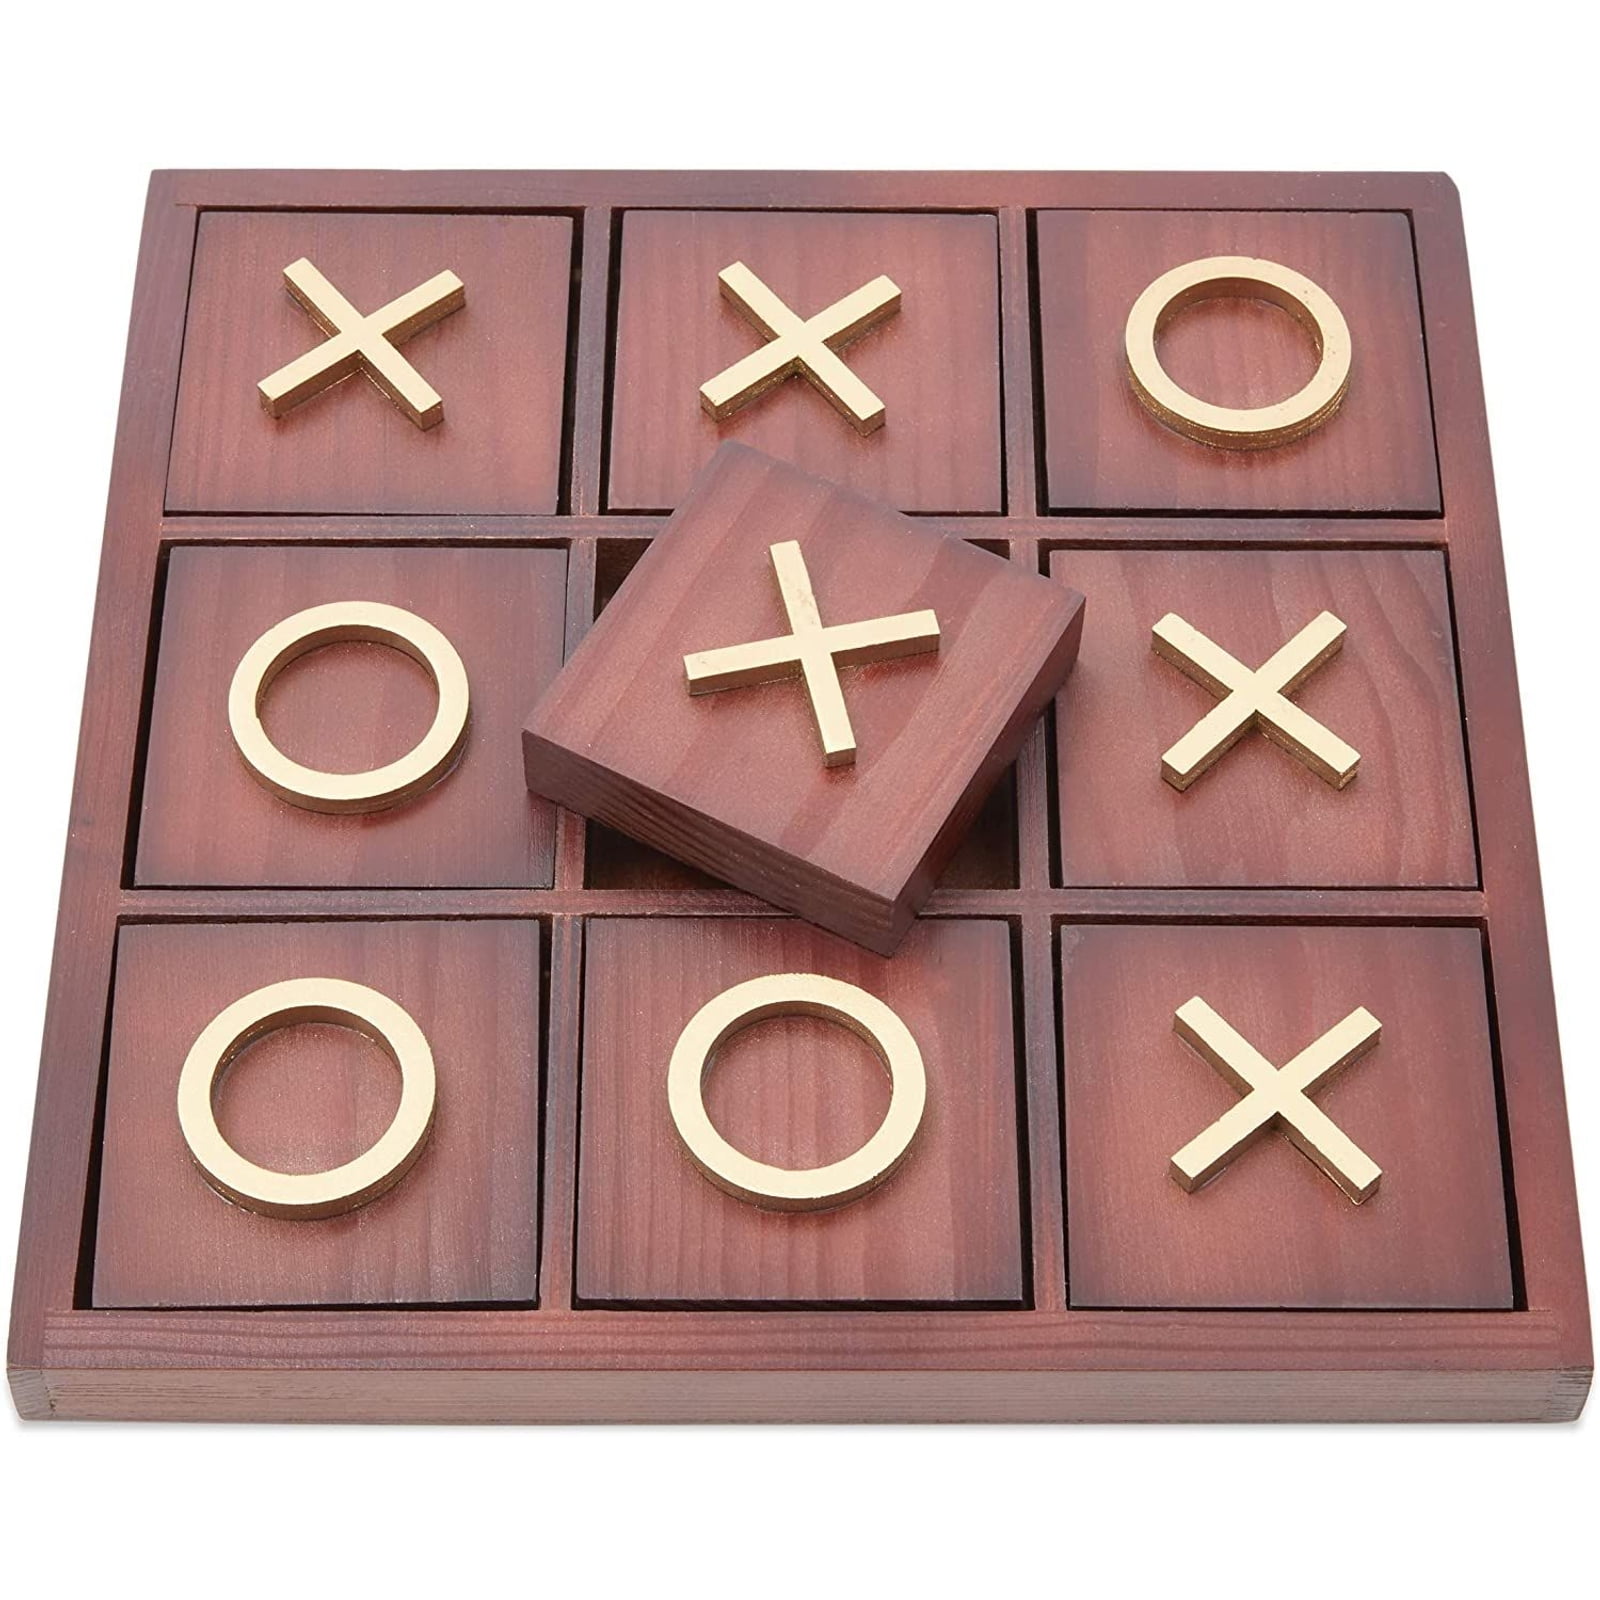 Wooden Tic Tac Toe Game & Travel Box Perfect as unusual gift idea 